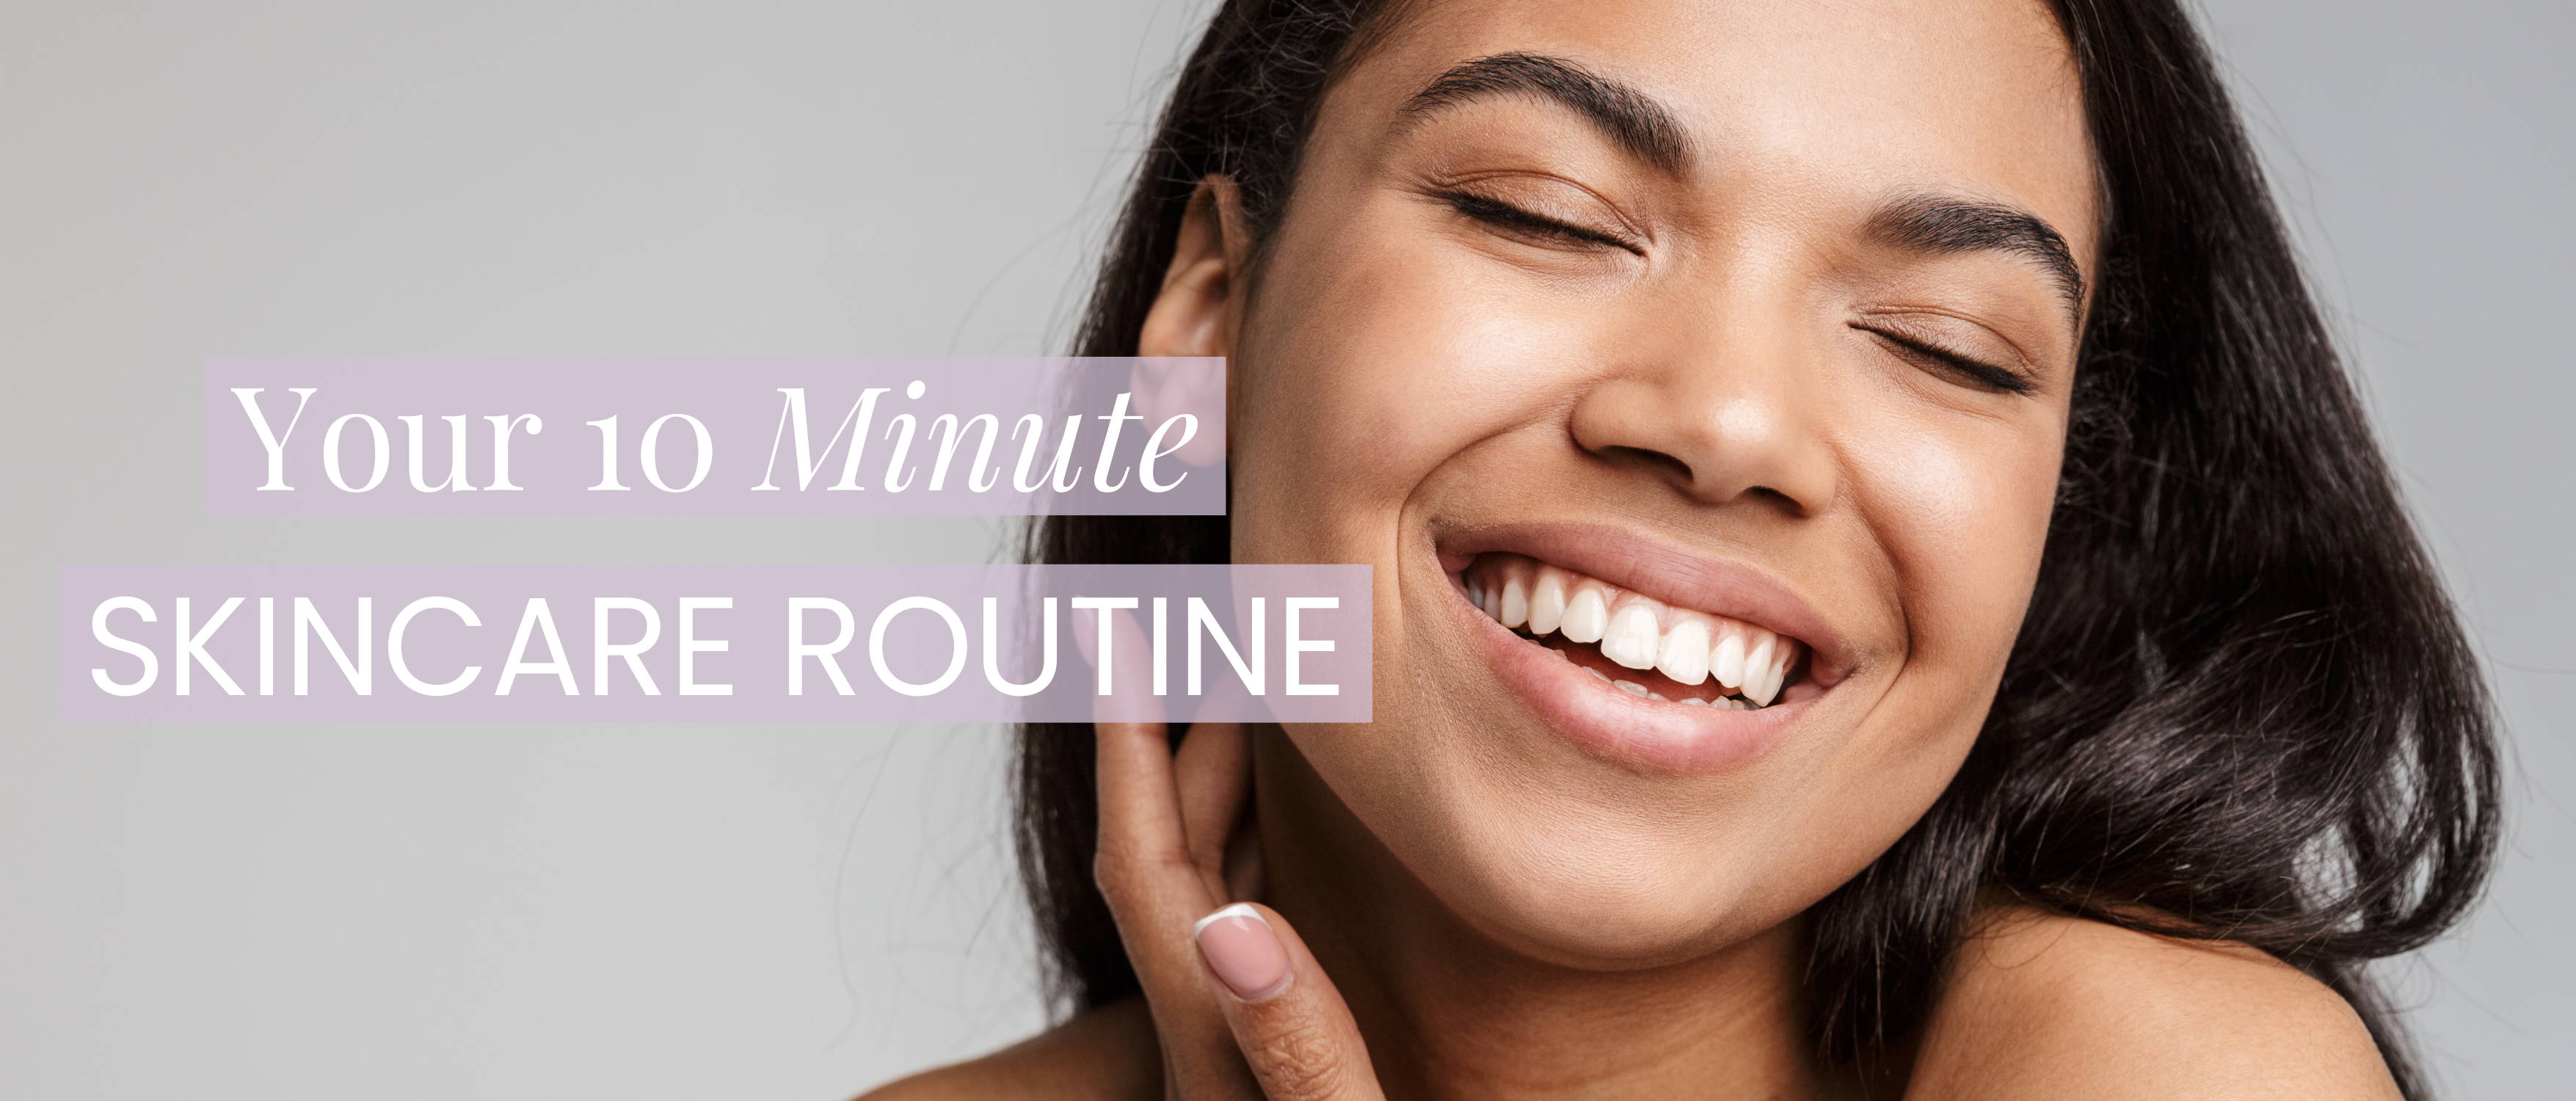 Your New 10 Minute Skincare Routine!